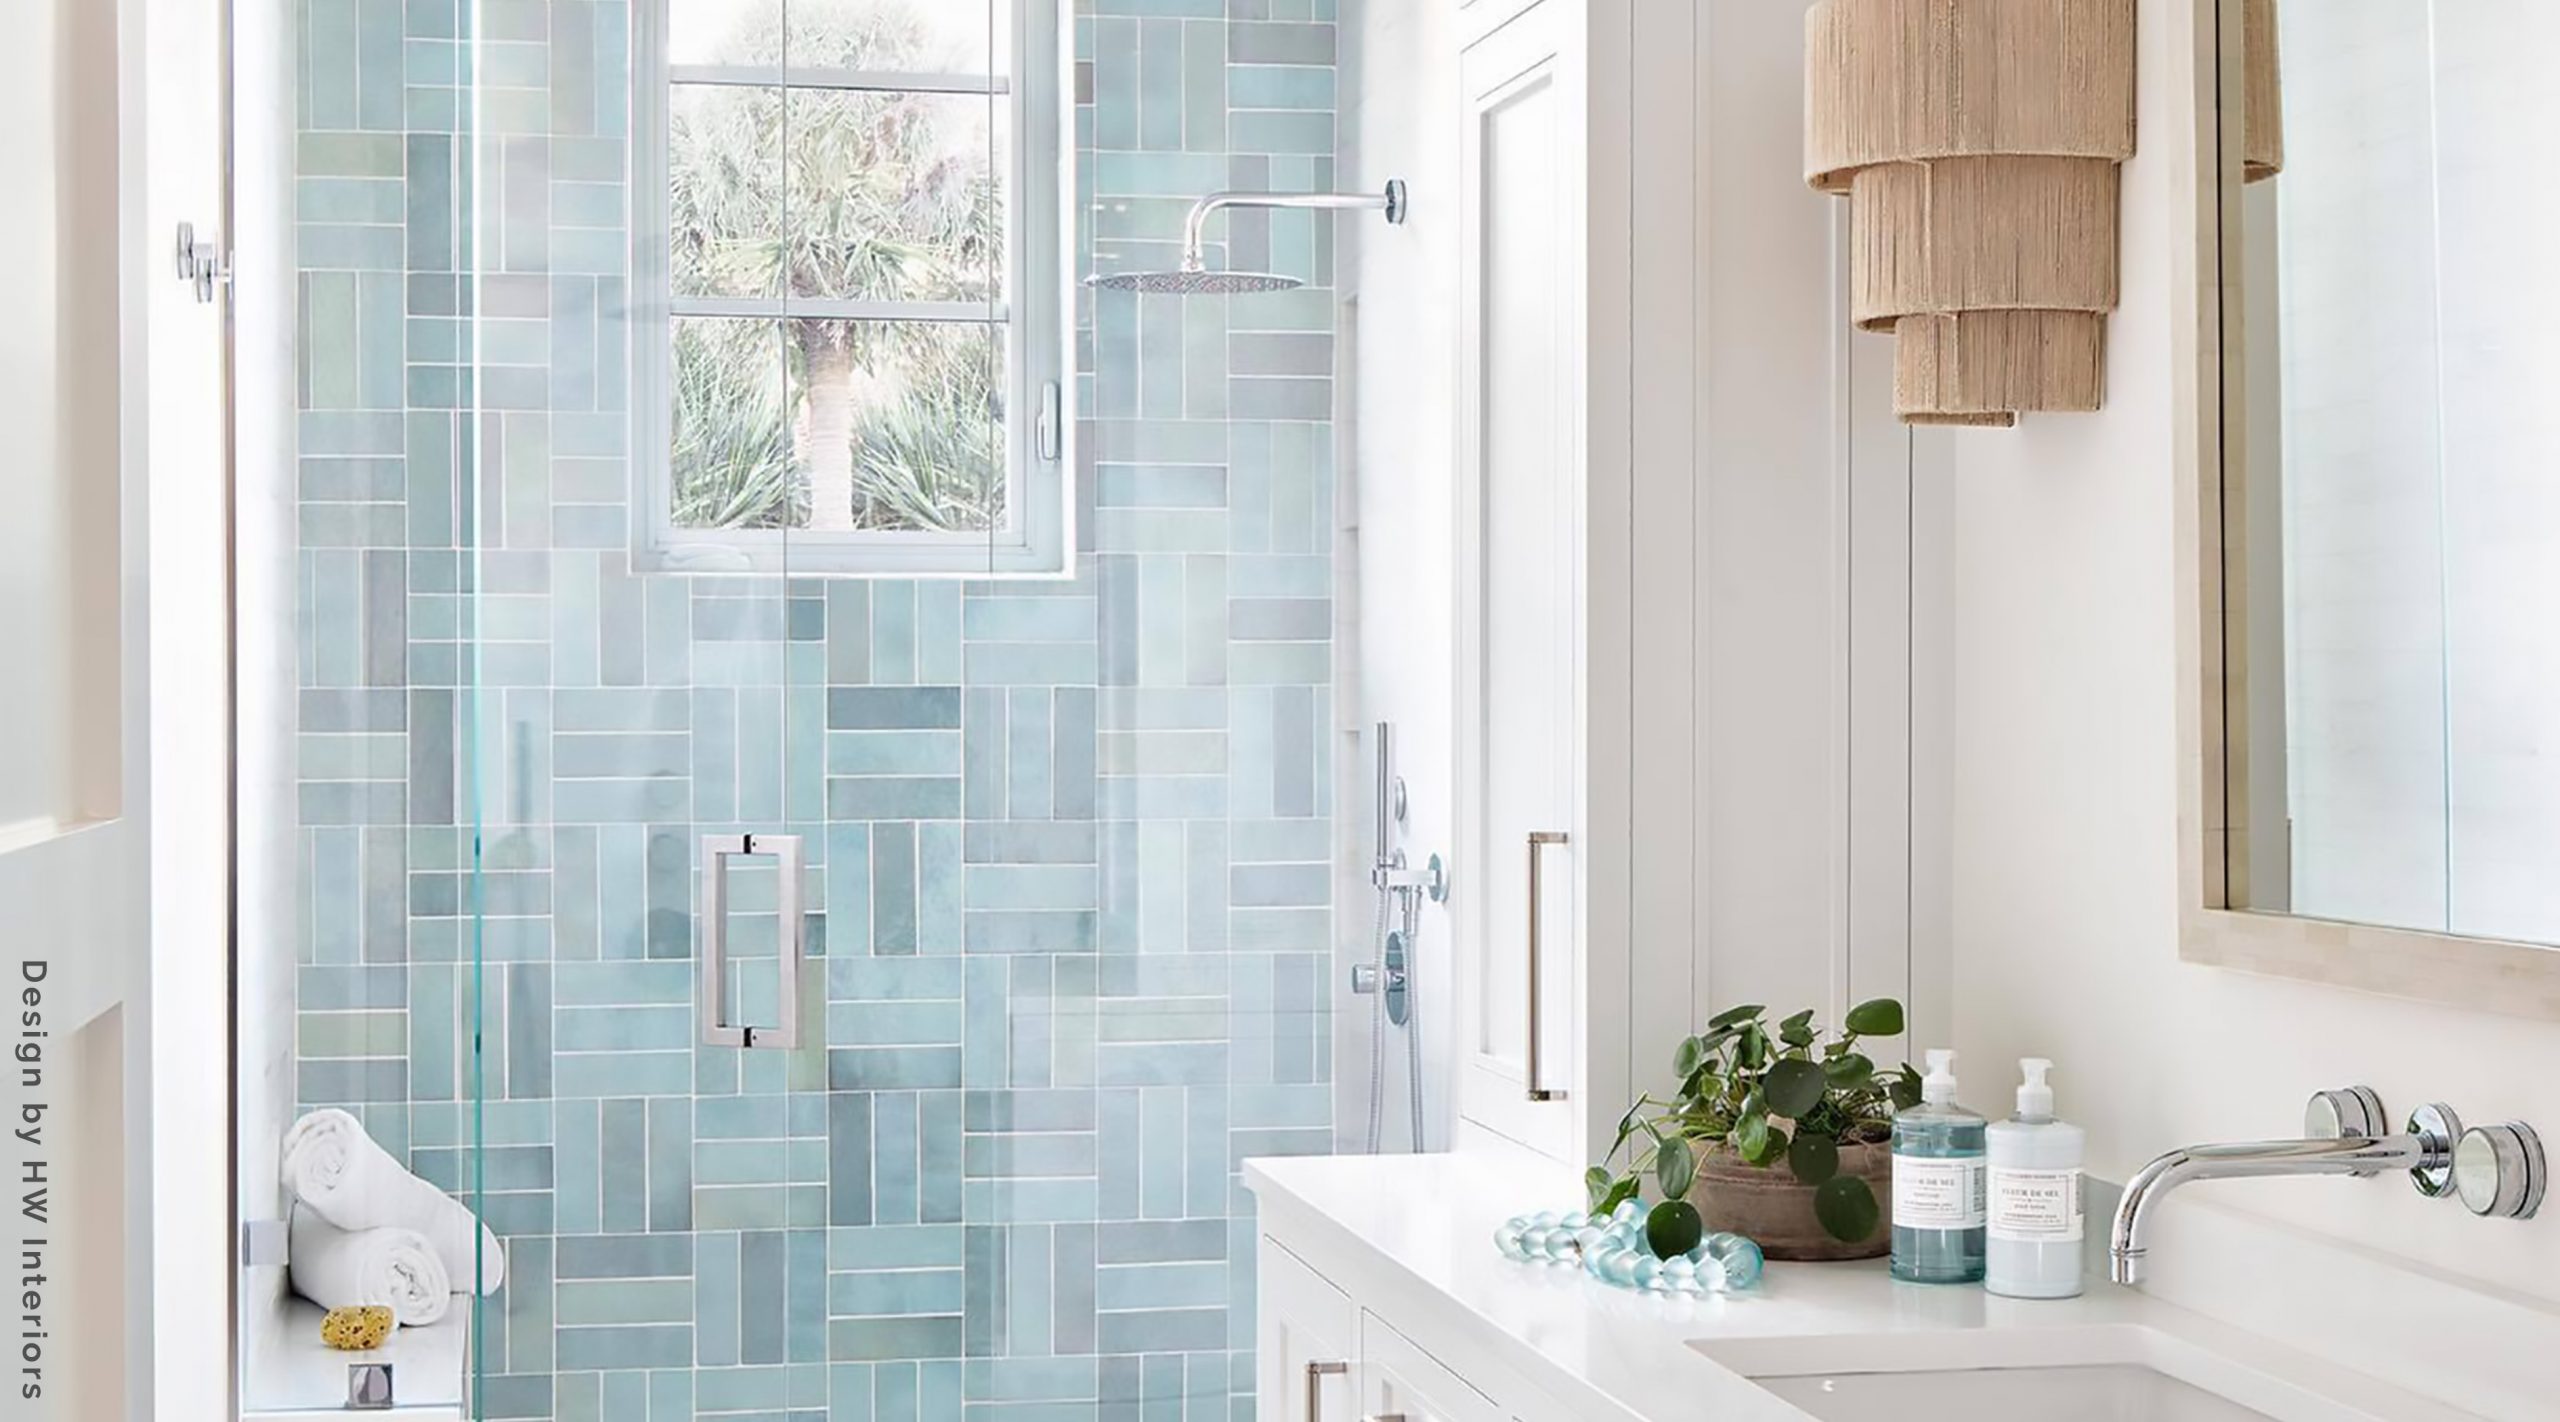 How To Choose Shower Tile Best Tiles, What Size Tile Looks Best In Small Bathroom